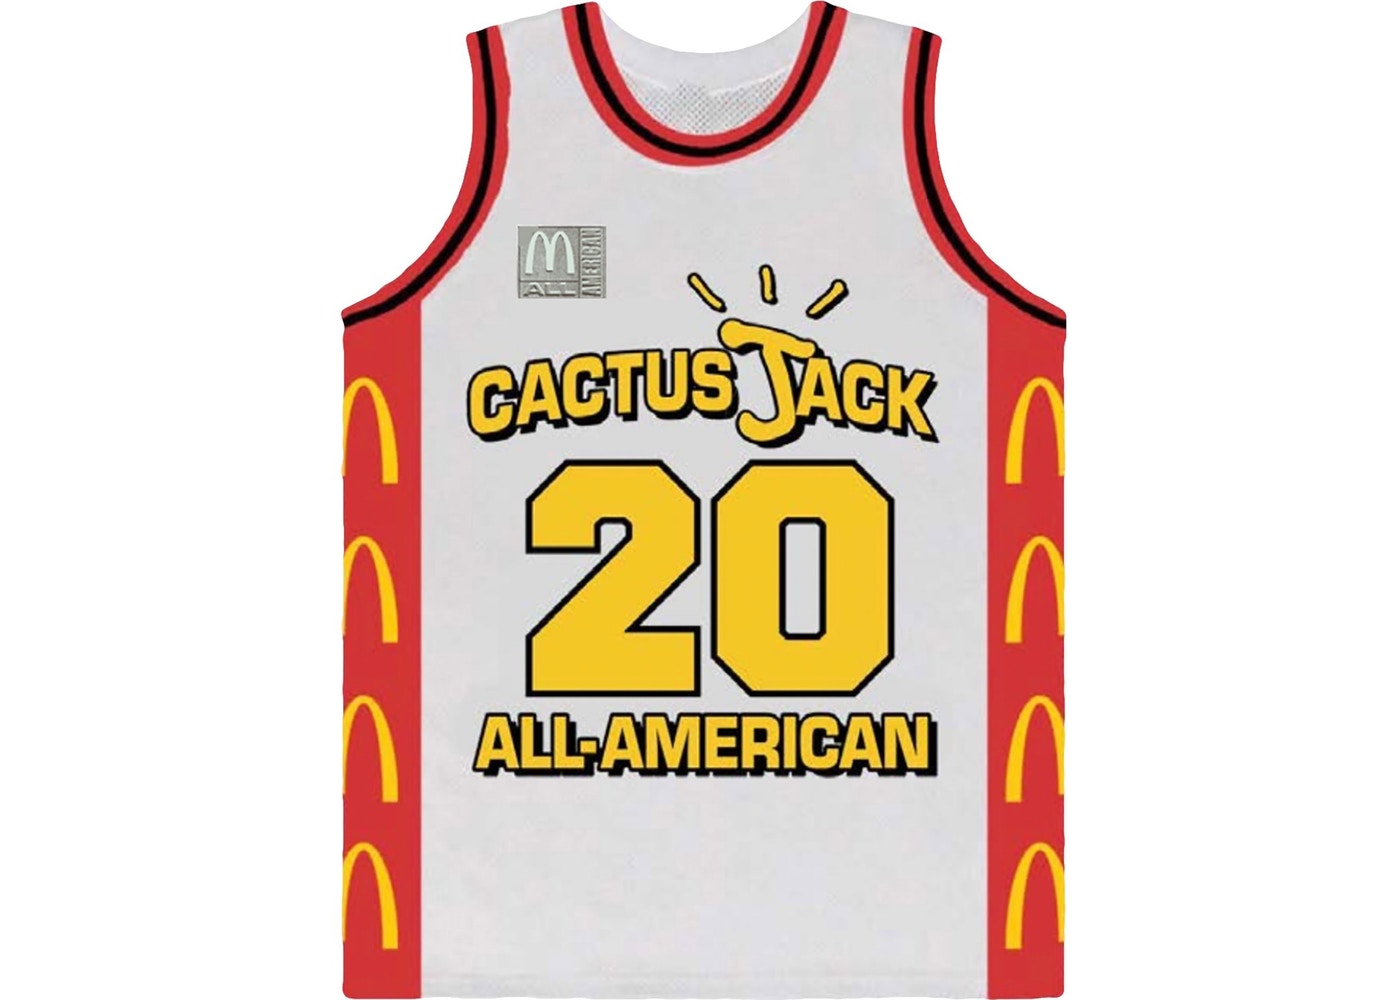 Cactus Jack All American Basketball Jersey